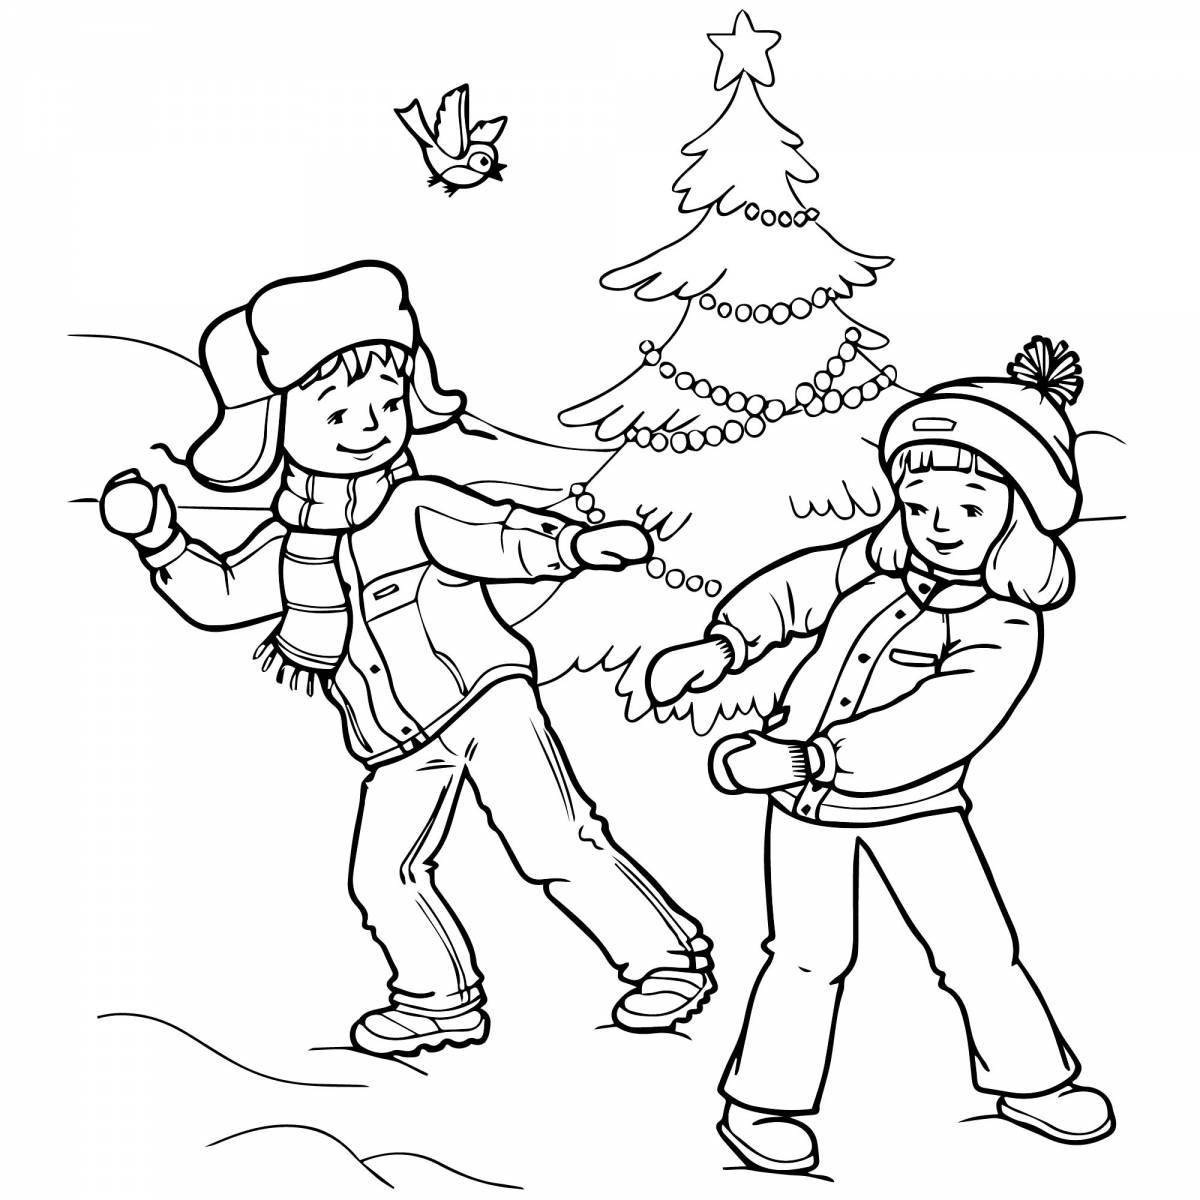 Cheerful coloring of children walking in winter